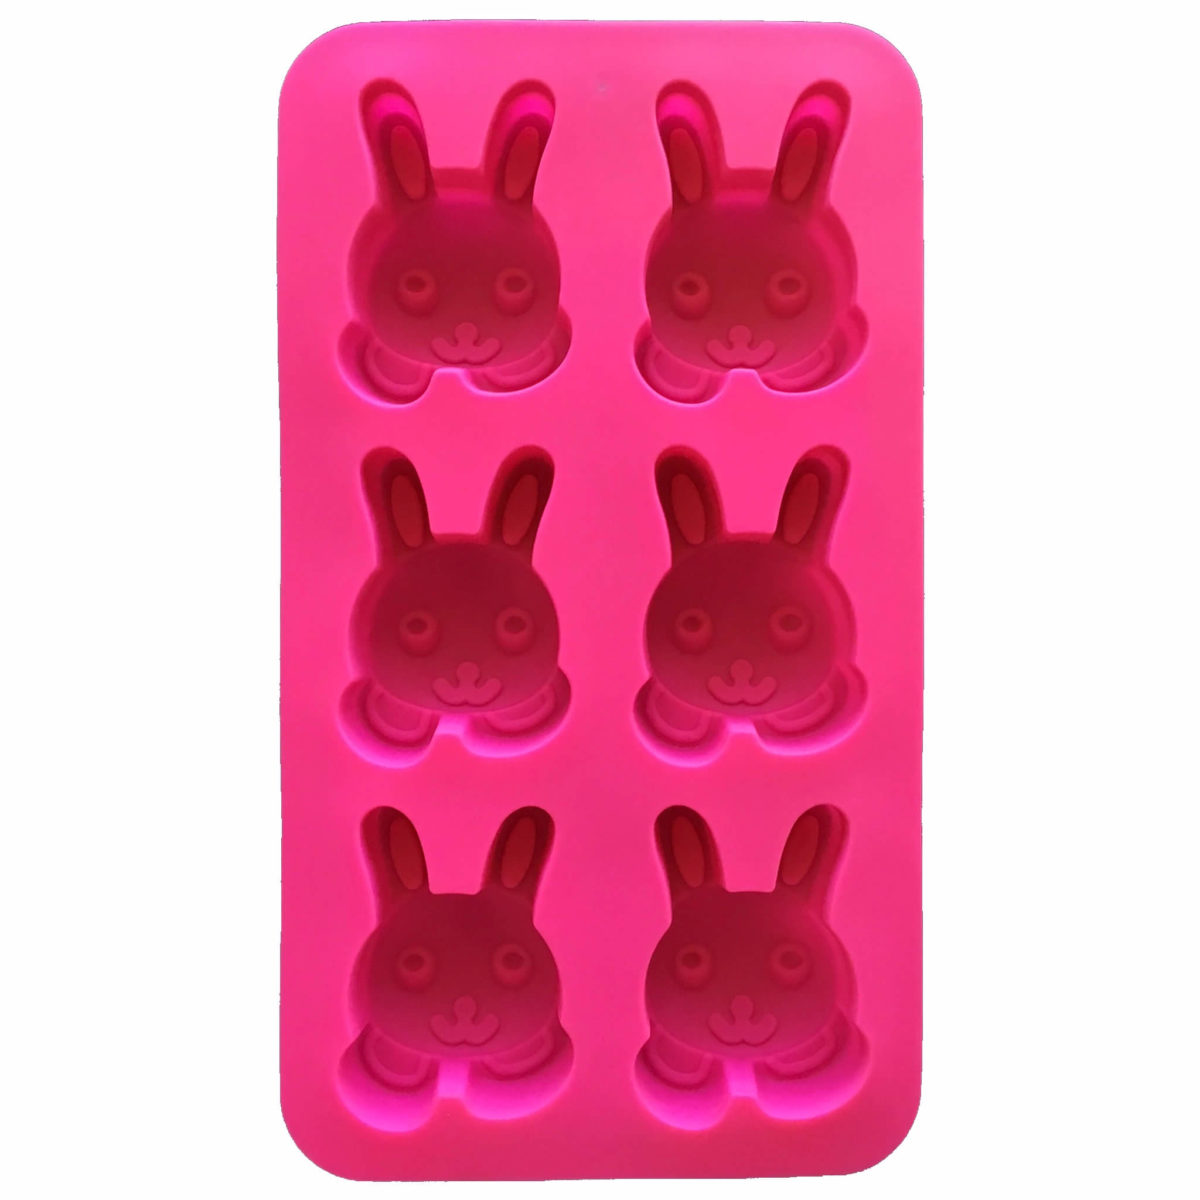 magenta coloured silicone mould with six identical bunny rabbit face cavities showing fine detail of mould cavites